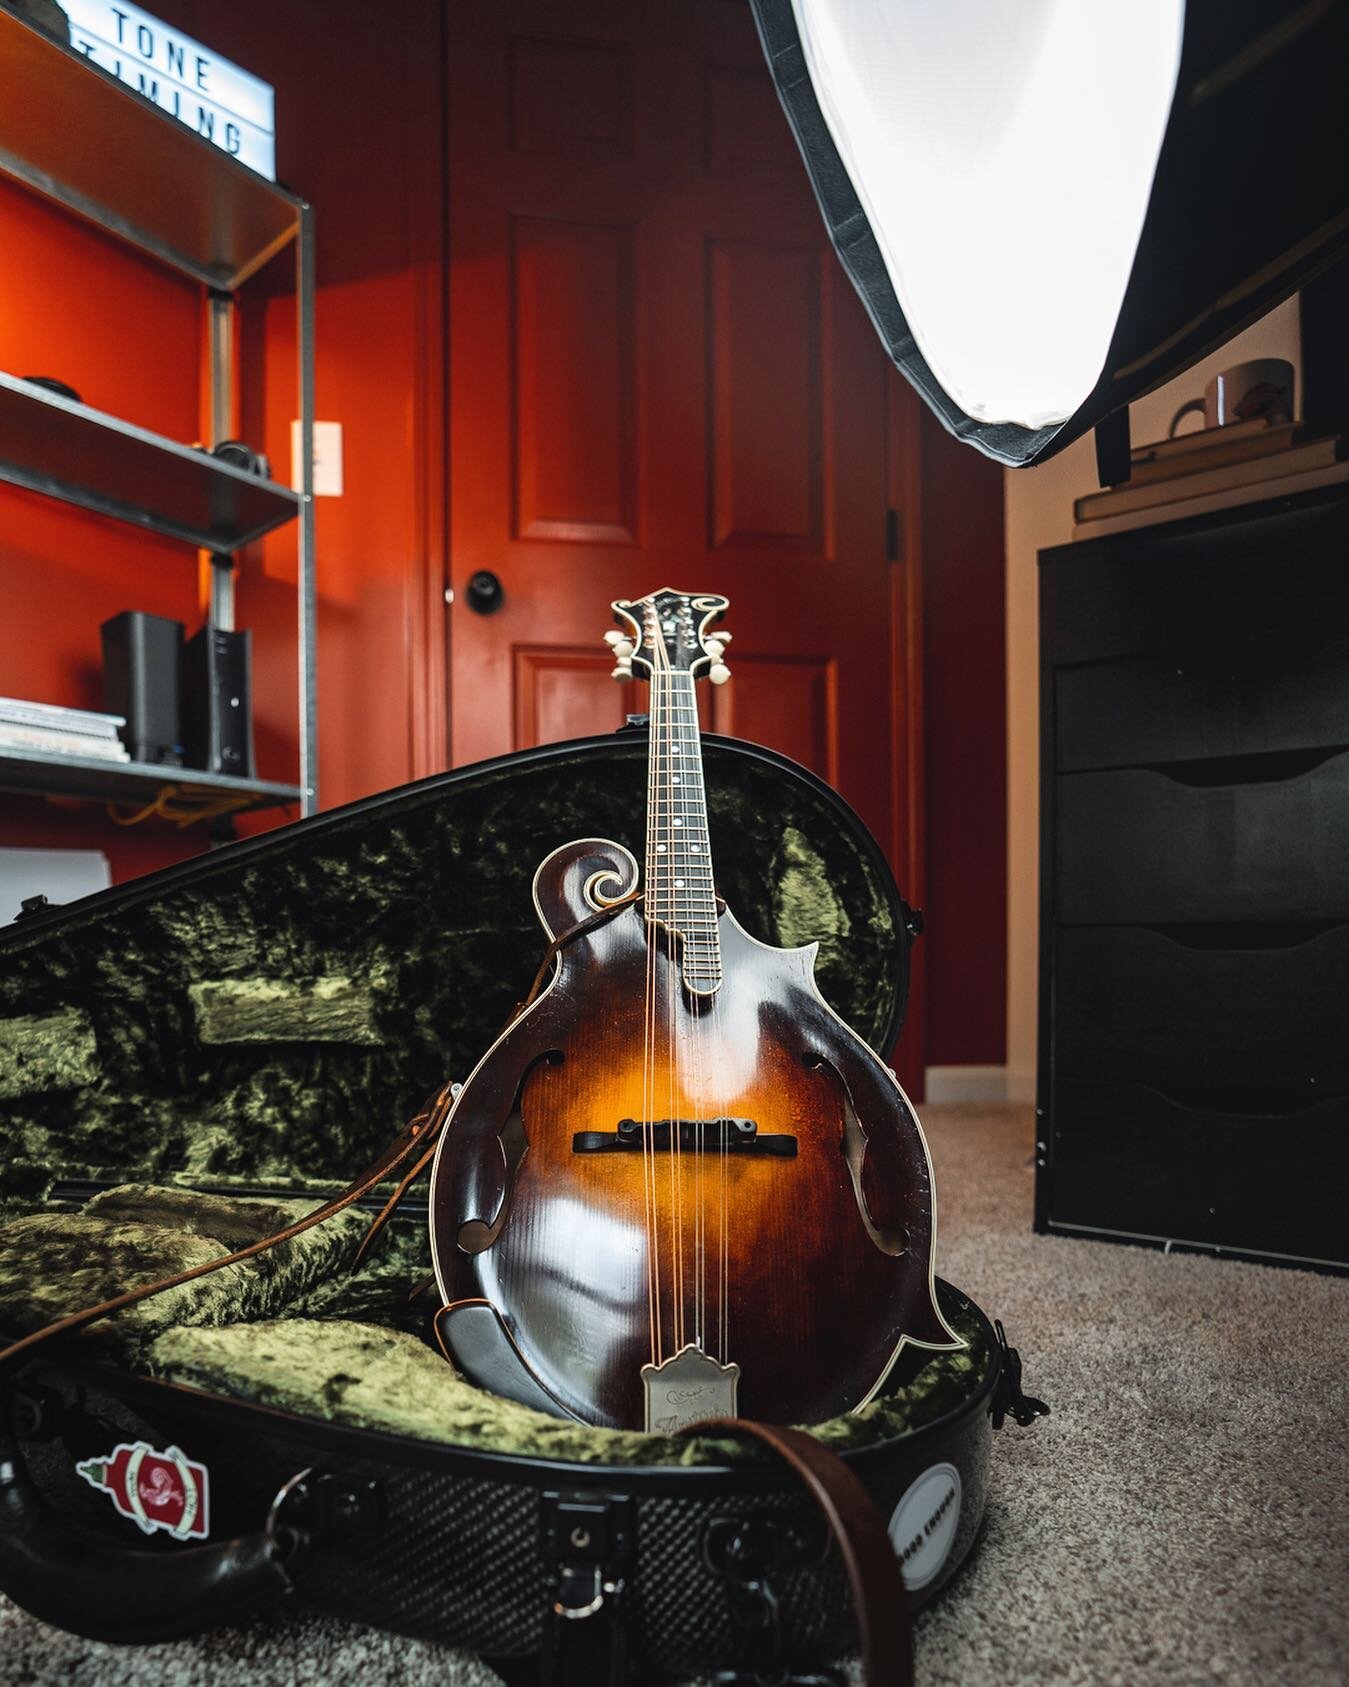 Lights, camera, mandolin! 🎥 Filming some new stuff for the YouTube channel today. What mandolin topics would you like to see covered in future videos?

#mandolin #studio #lightscameraaction #youtube